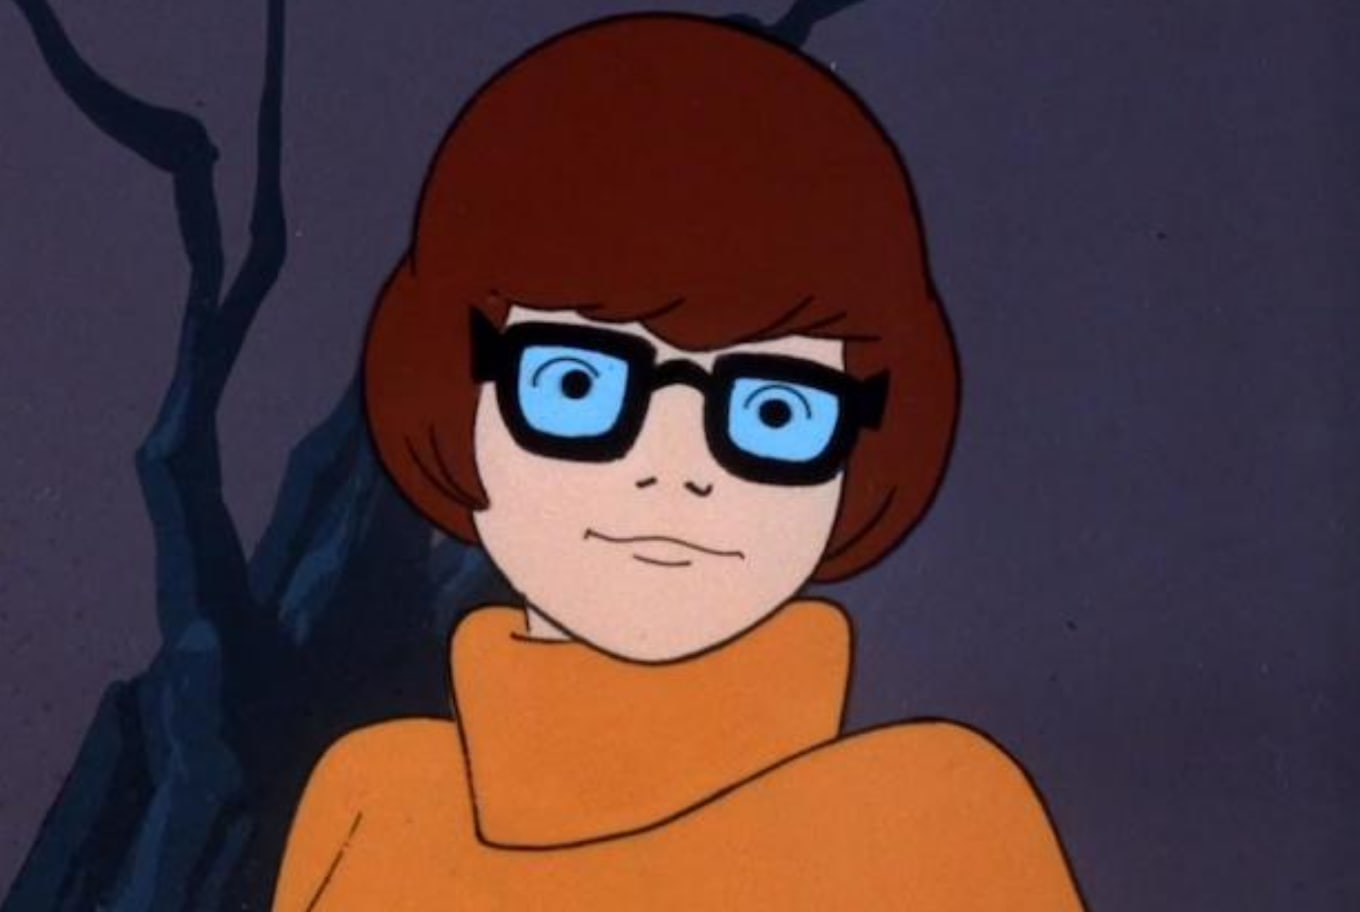 coy ramsey share images of velma from scooby doo photos